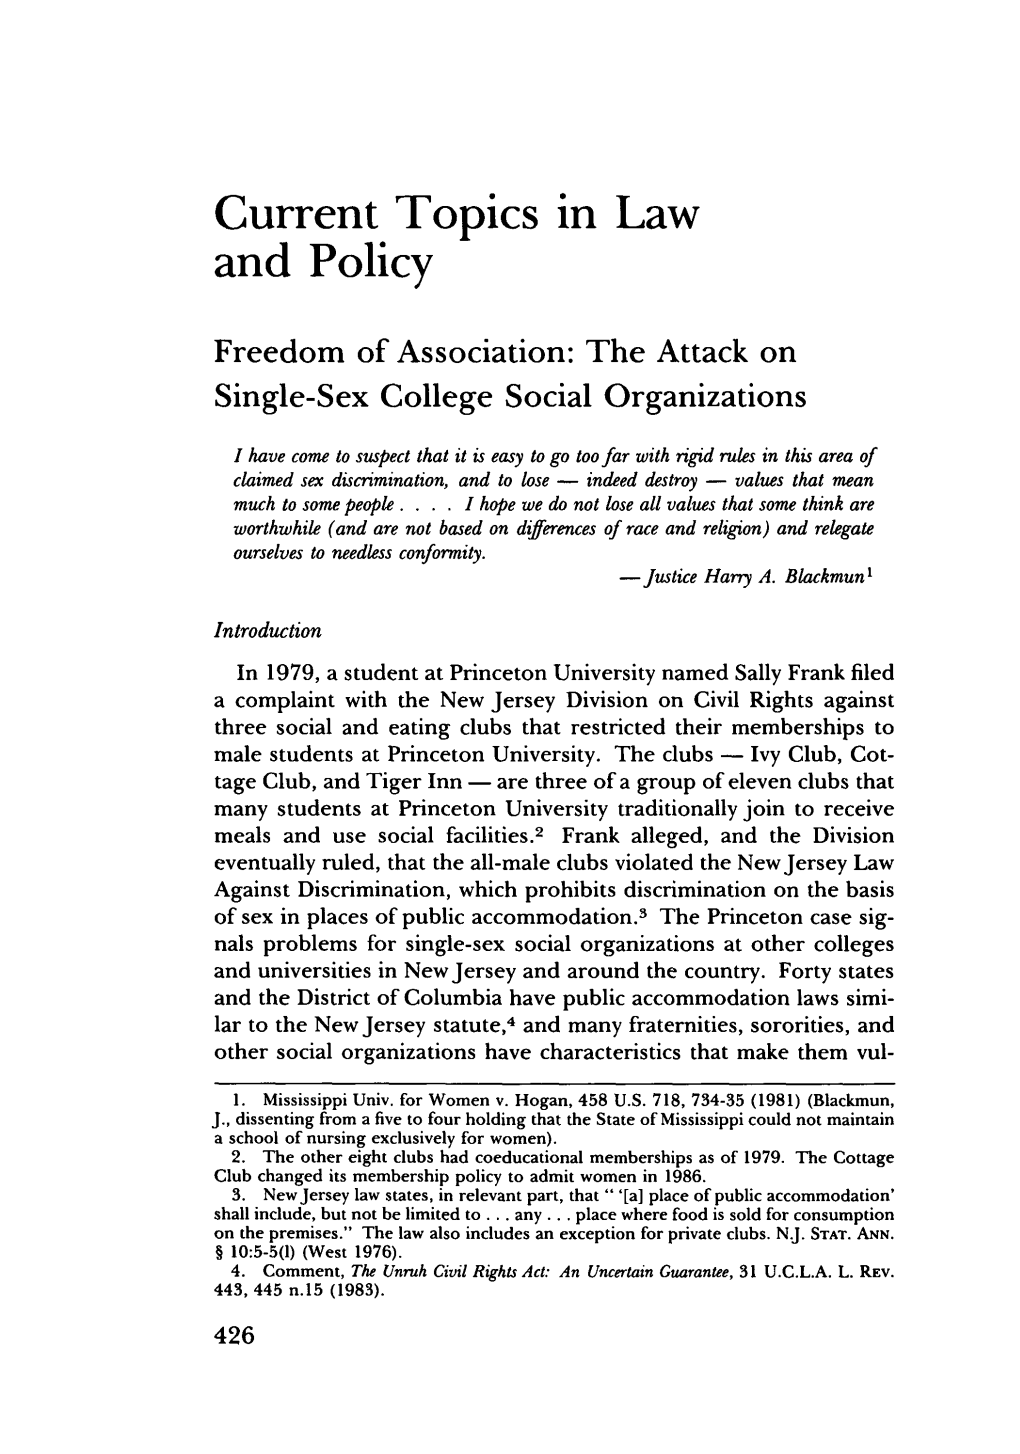 Freedom of Association: the Attack on Single-Sex College Social Organizations